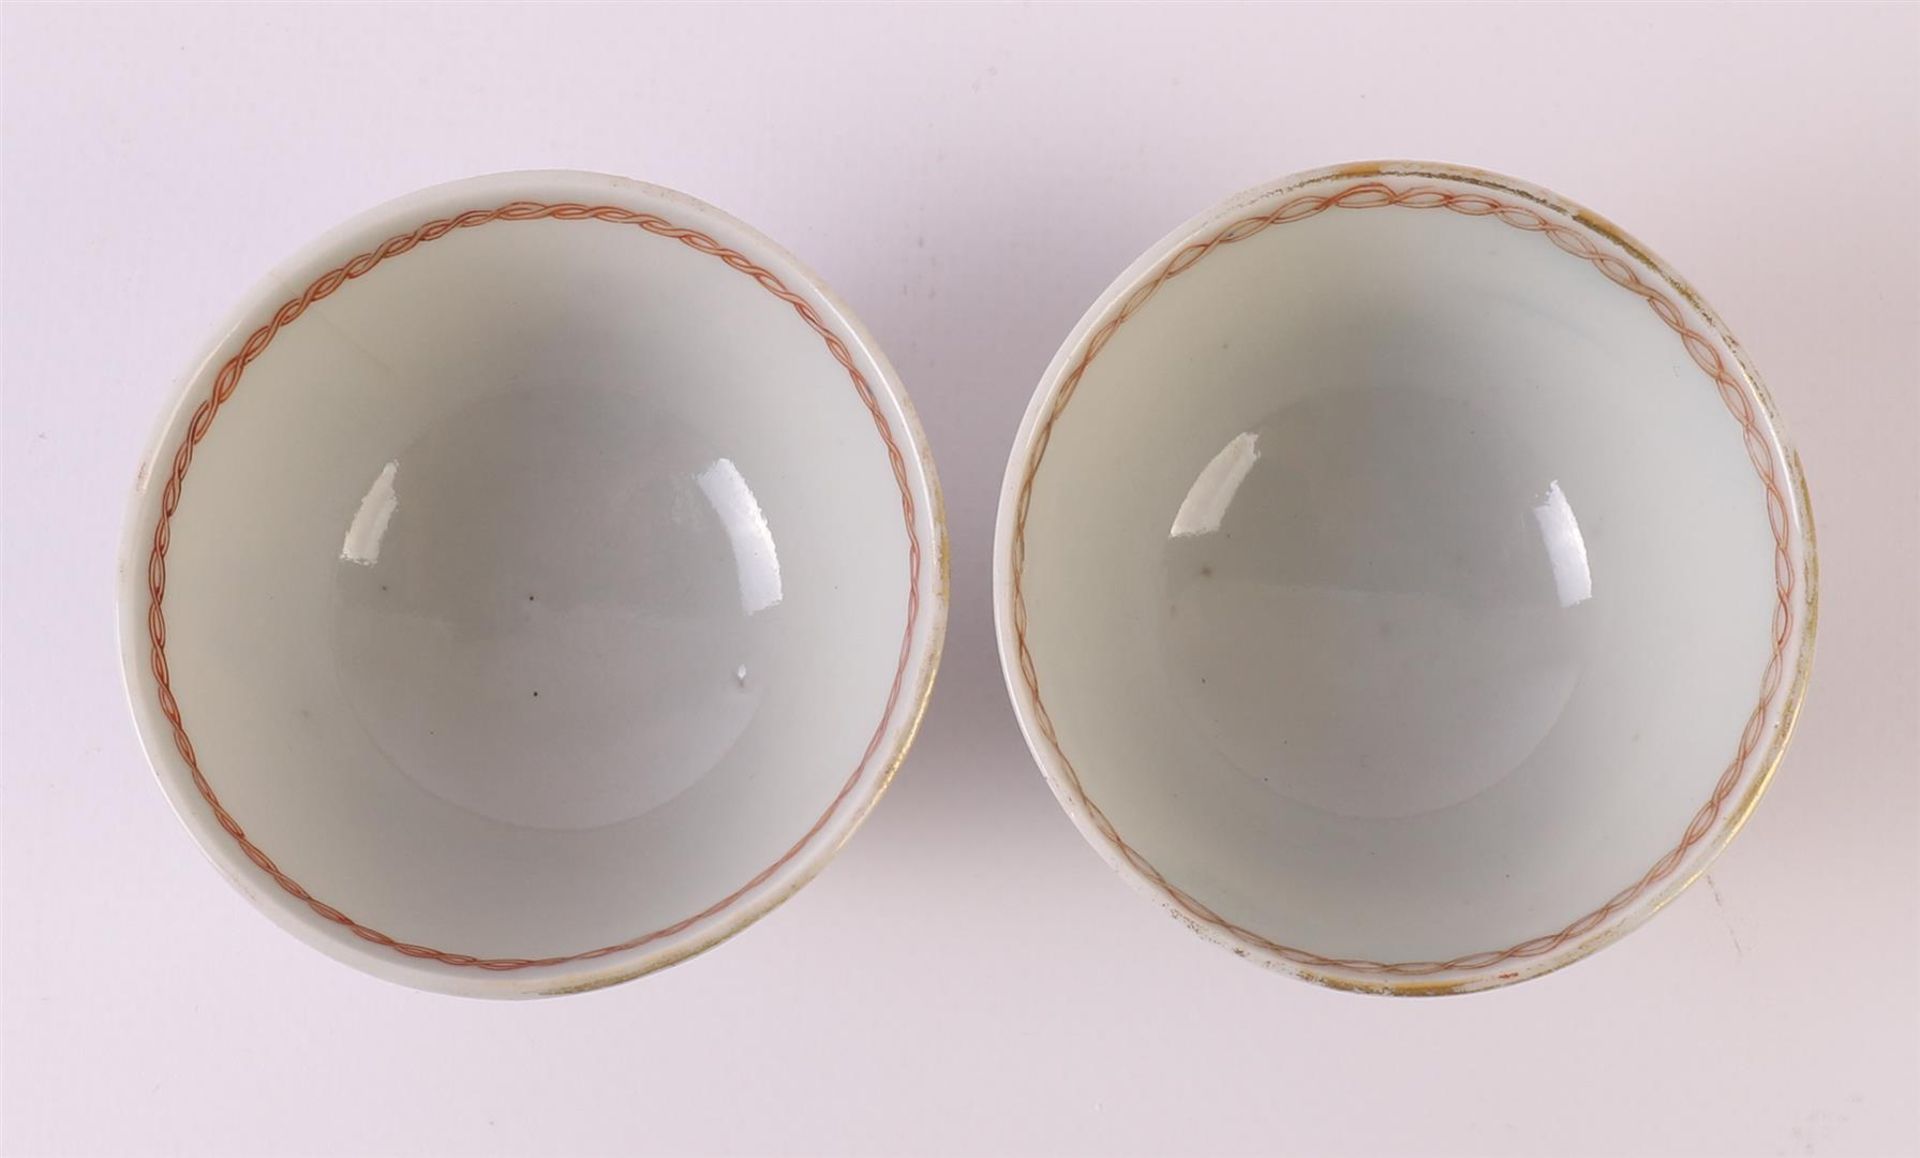 Four porcelain cups and accompanying saucers, Chine de Commande, China, Qianlong, 18th century. - Image 15 of 22